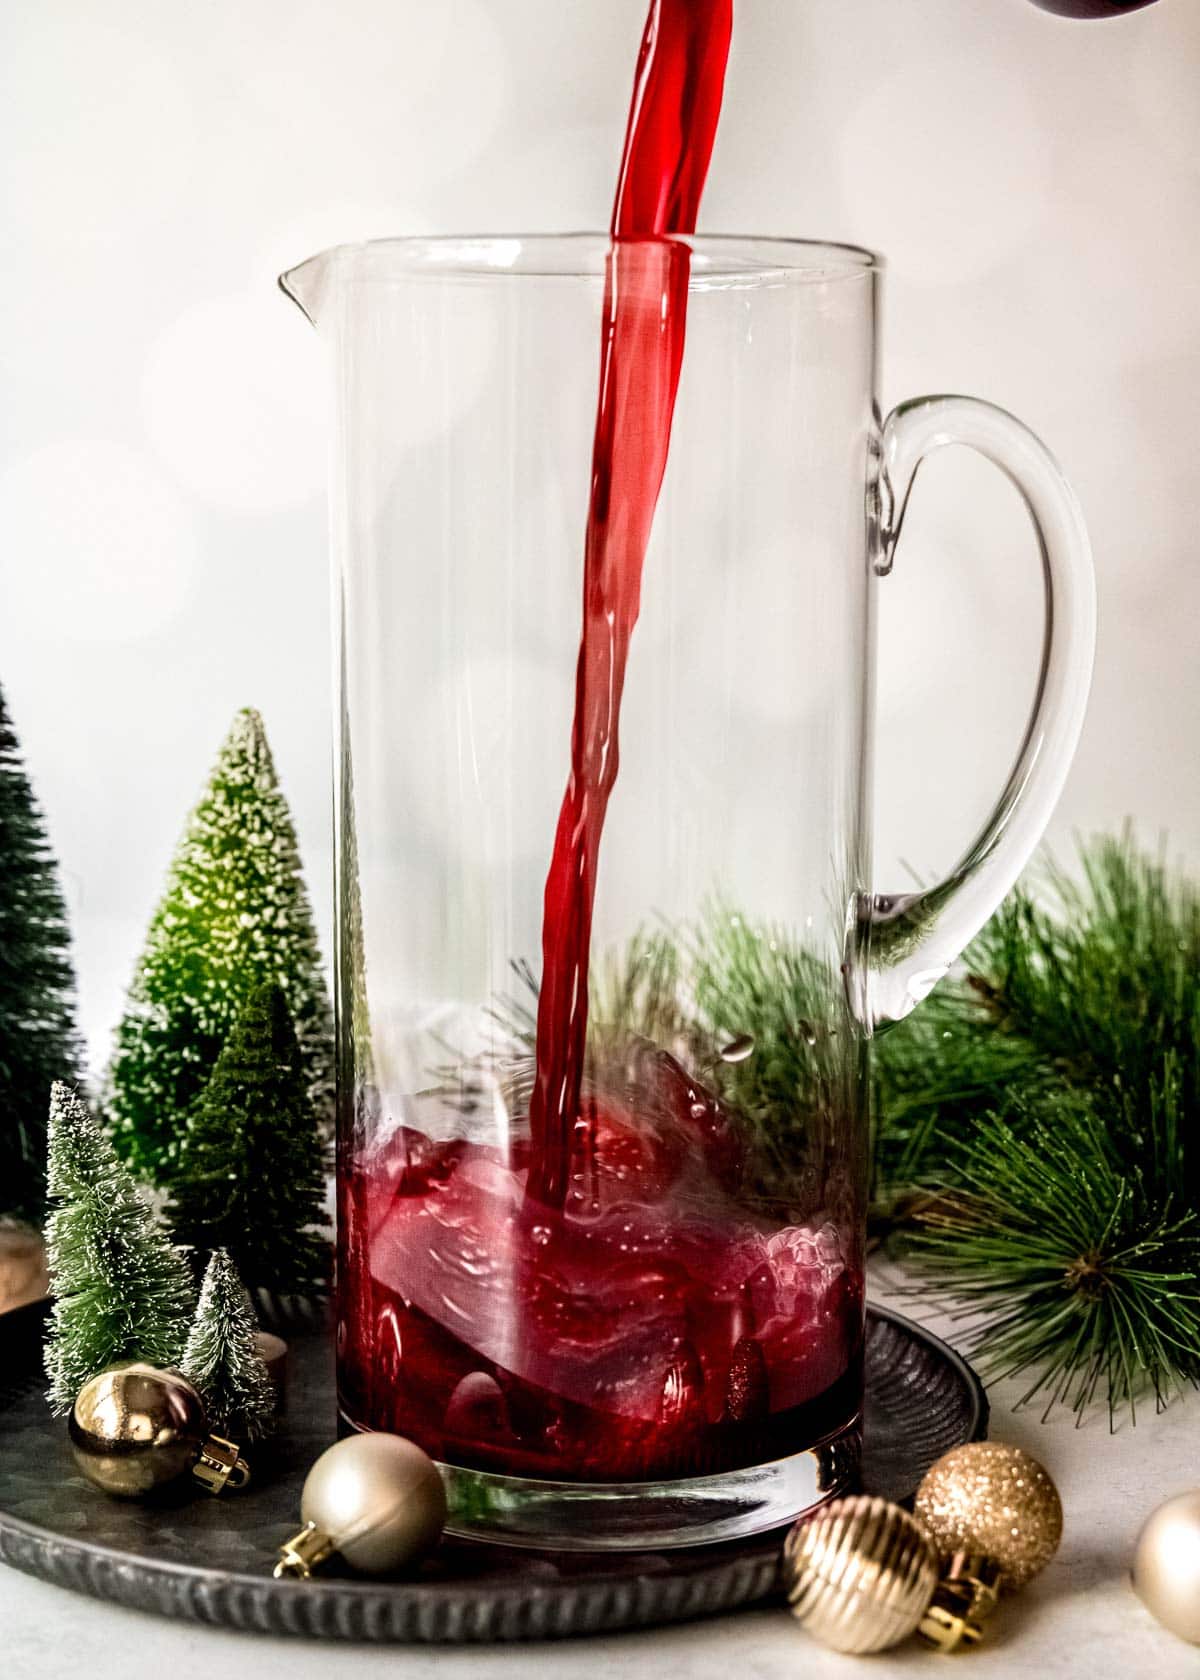 pomegranate juice being poured into a pitcher